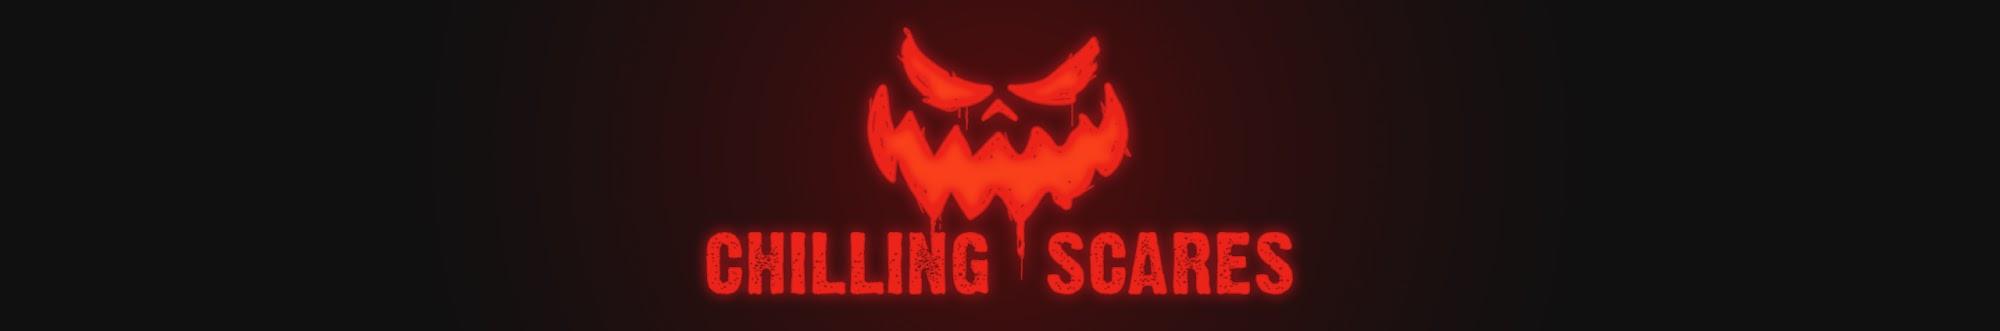 Chilling Scares